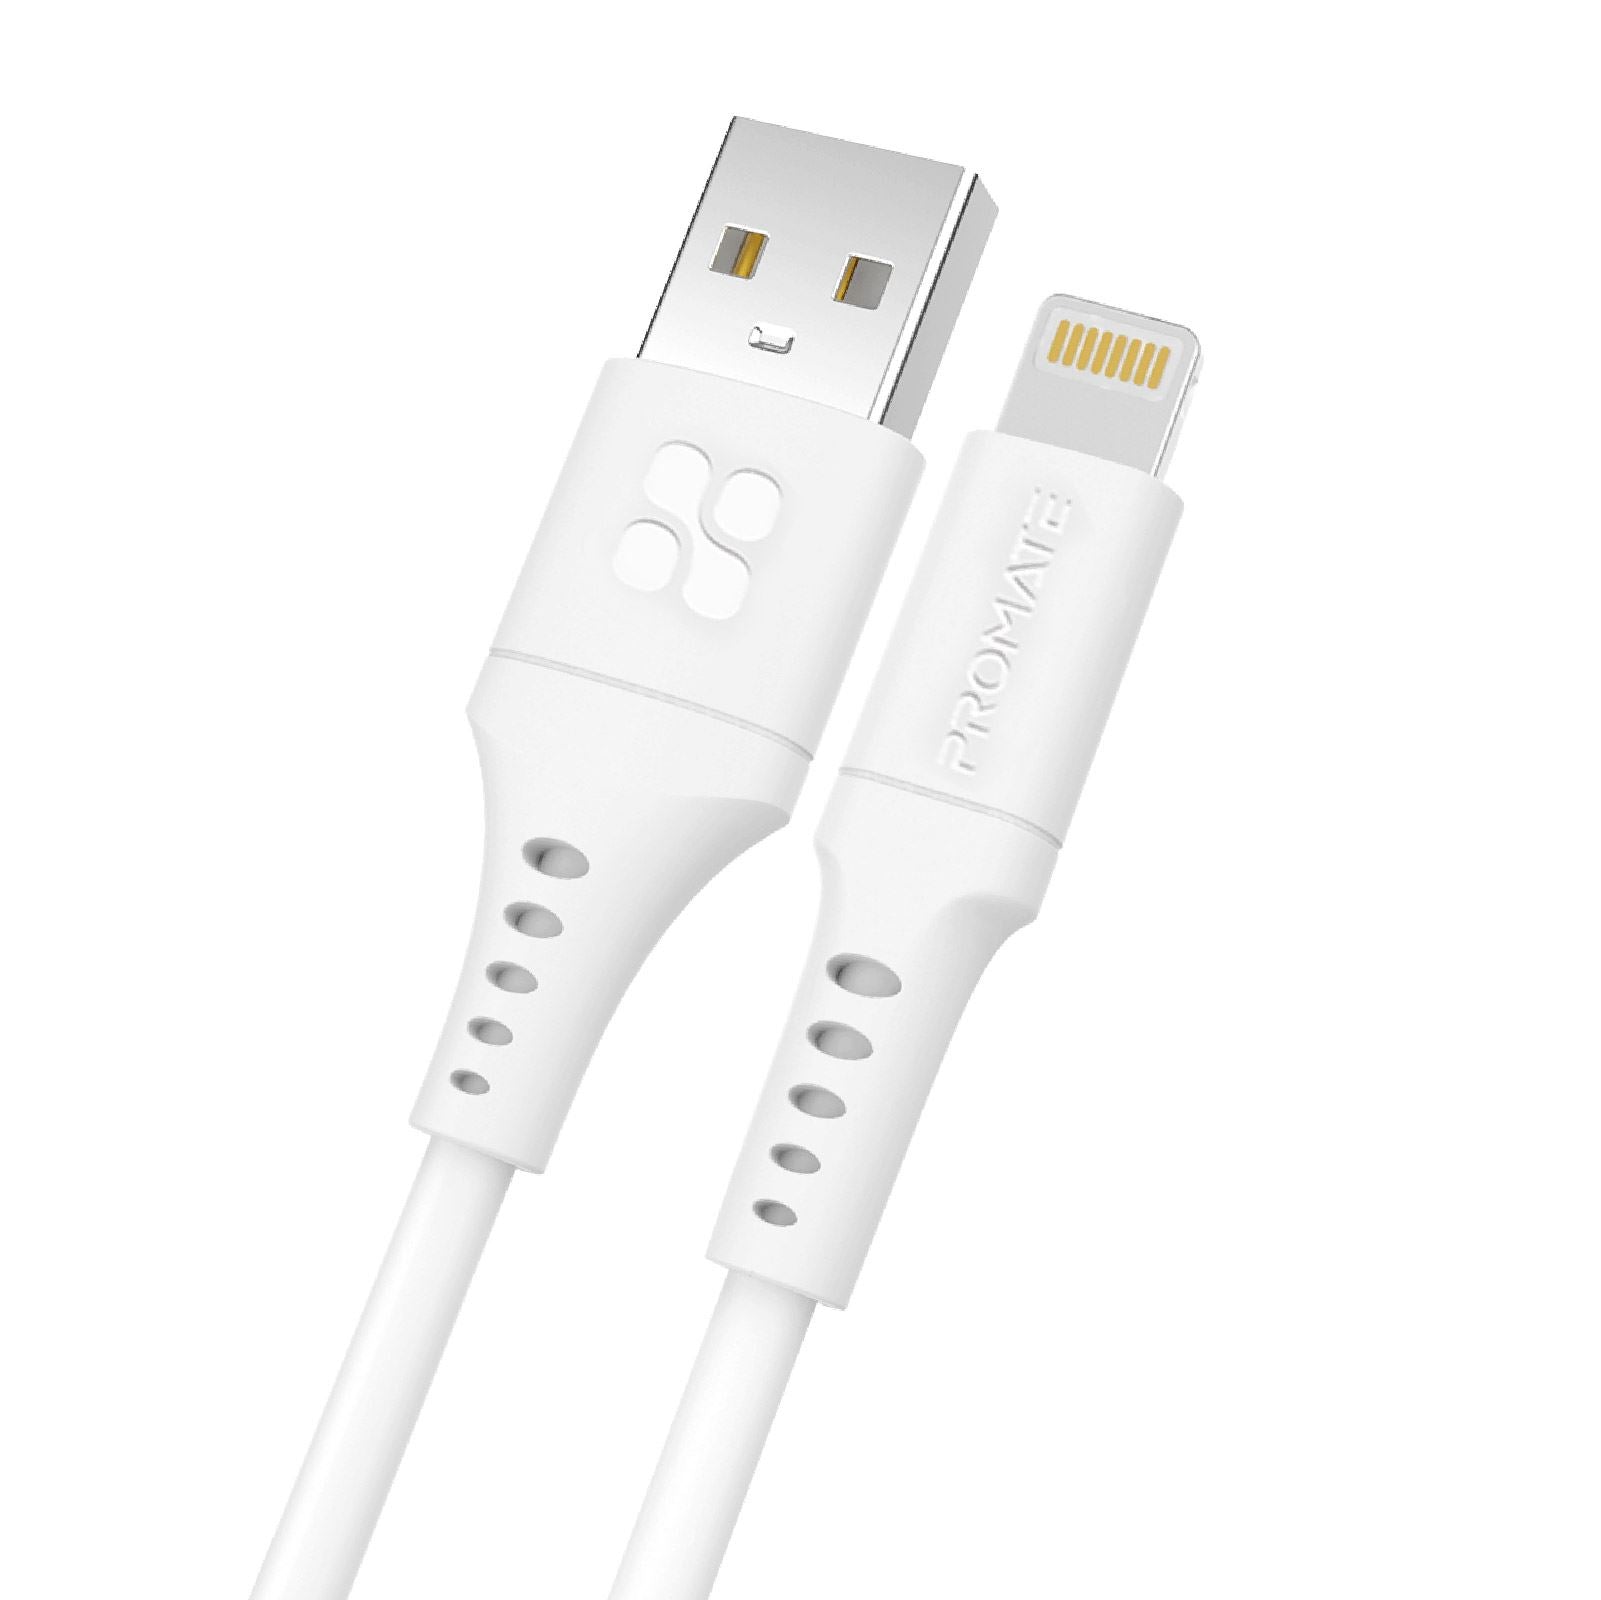 PROMATE_1.2m_USB-A_to_Lightning_Data_&_Charge_Cable._Data_Transfer_Rate_480Mbps._Total_Current_2.4A._Durable_Soft_Silicon_Cable._Tangle_Resistant_25000+_Bend_Tested._White_**Not_MFI_Certified** 1650